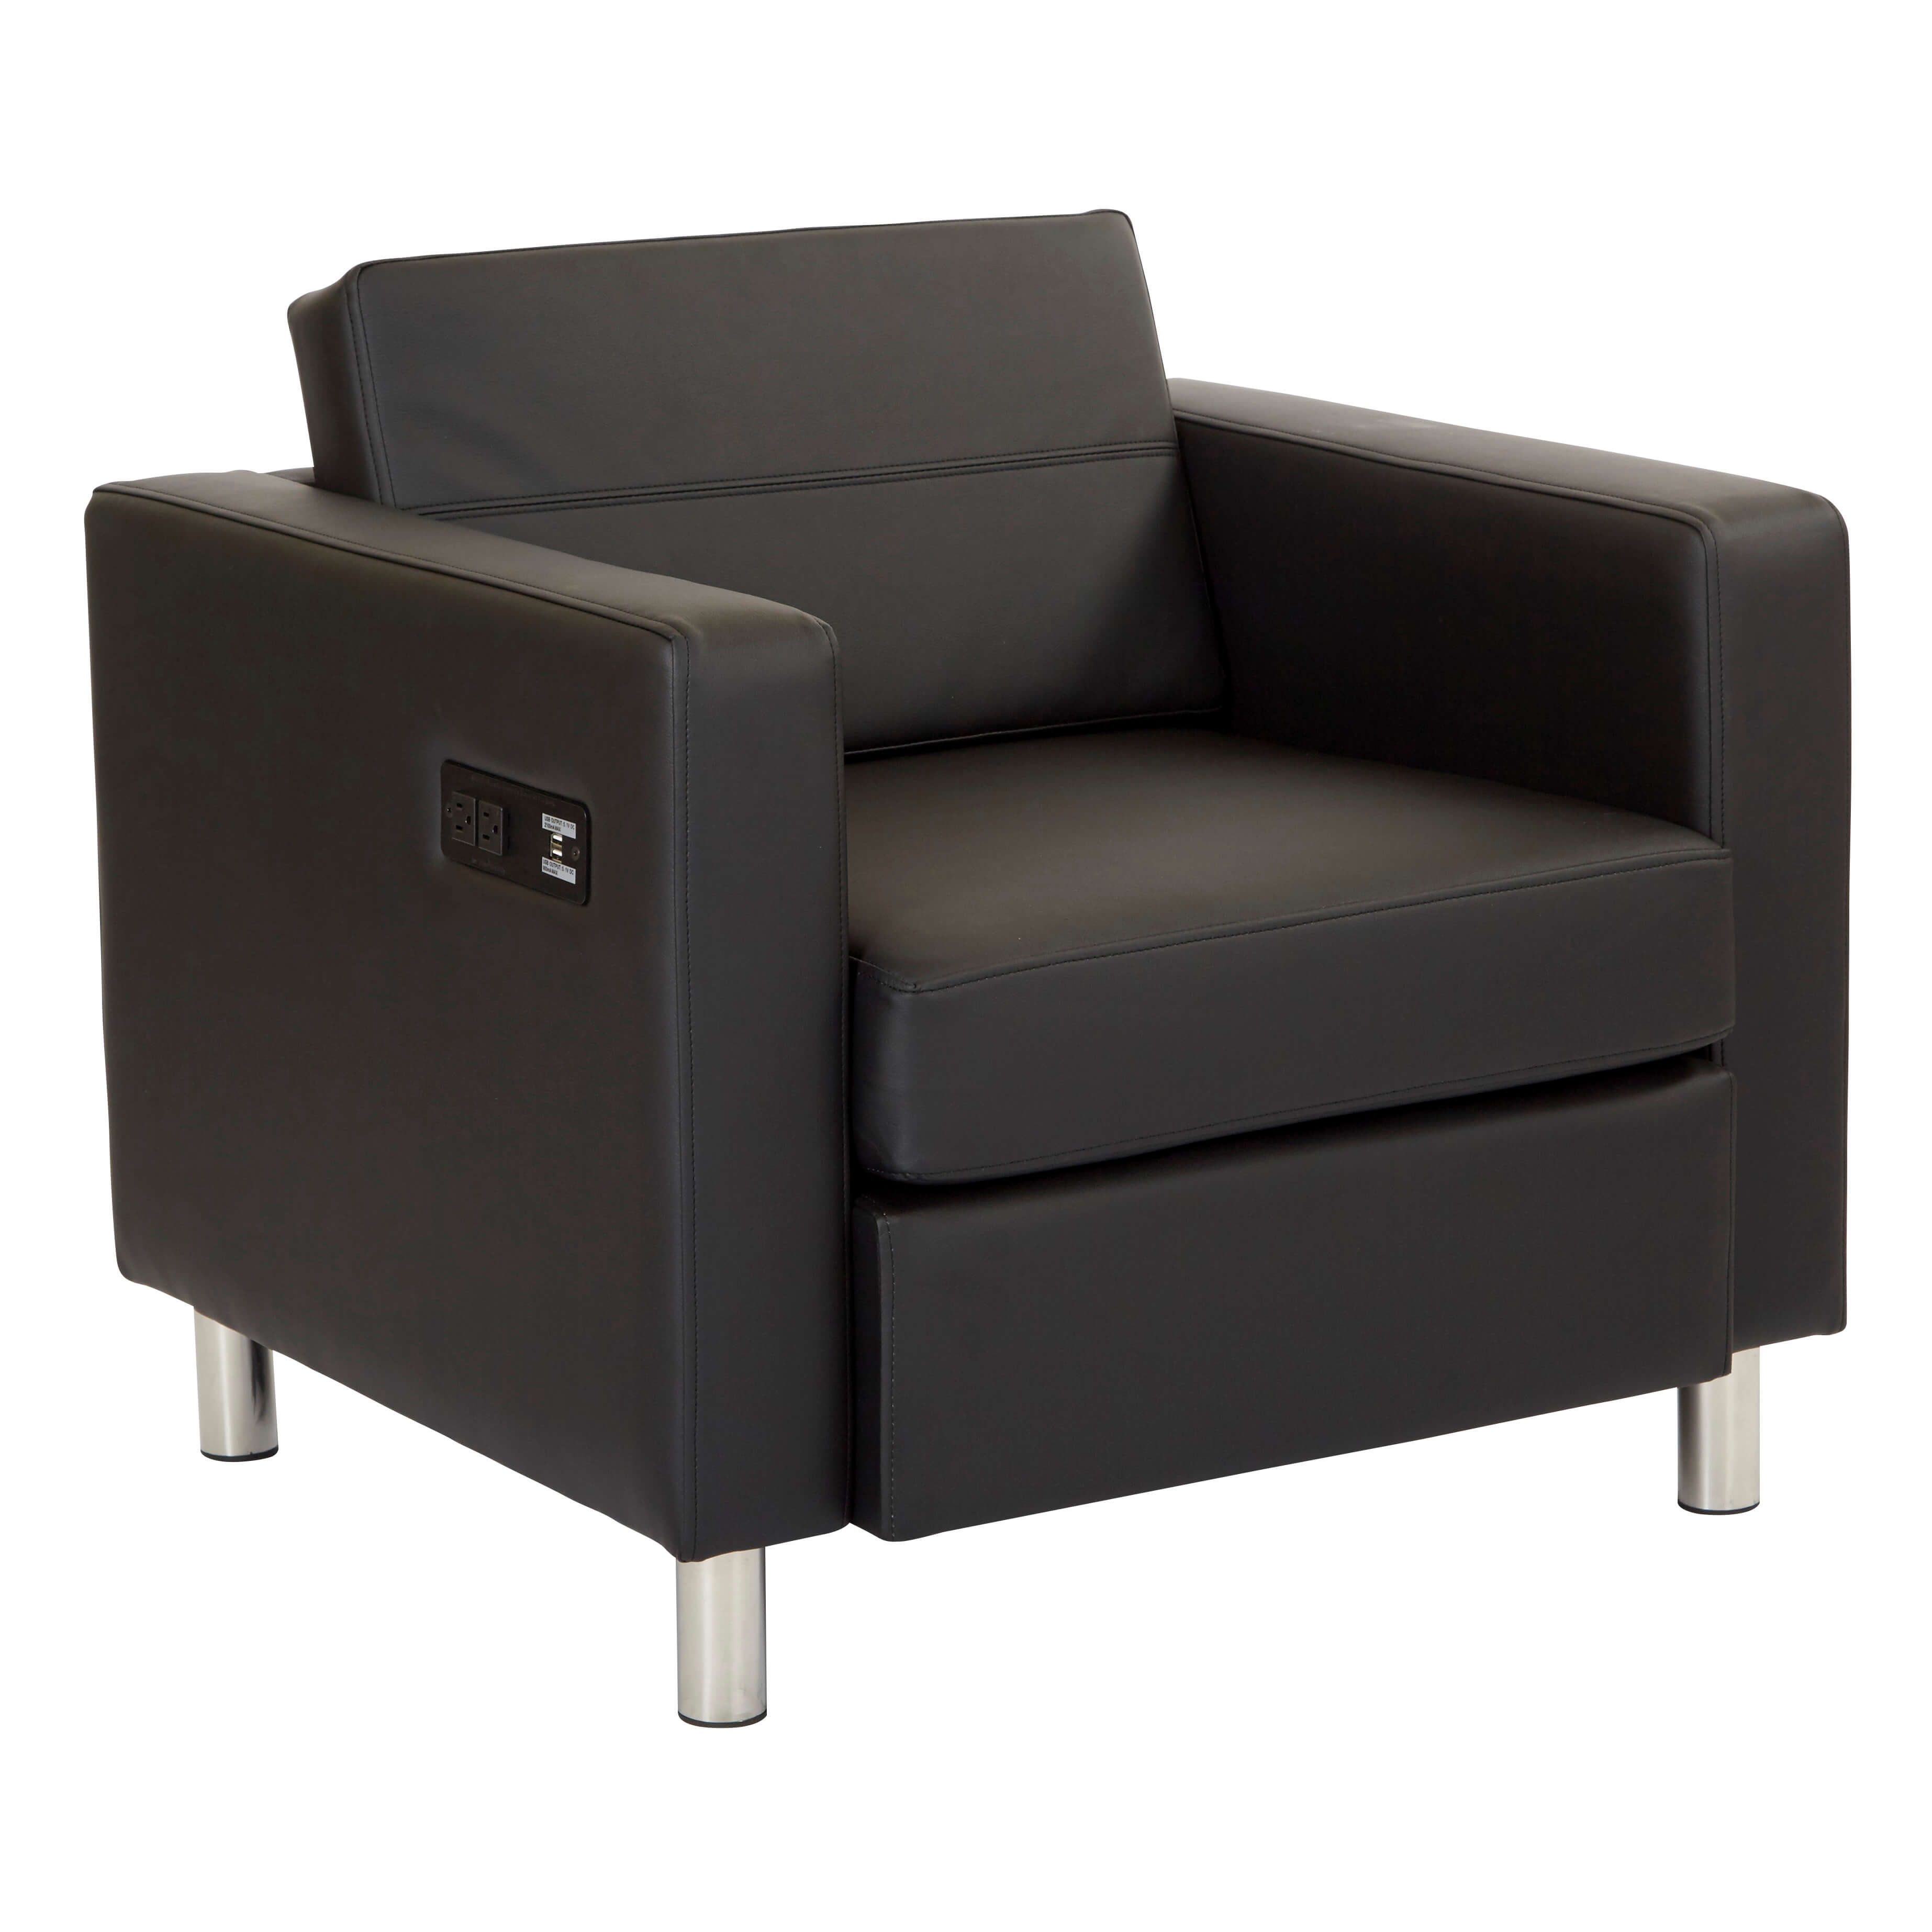 Office lounge chairs CUB ATL51 R107 PSO